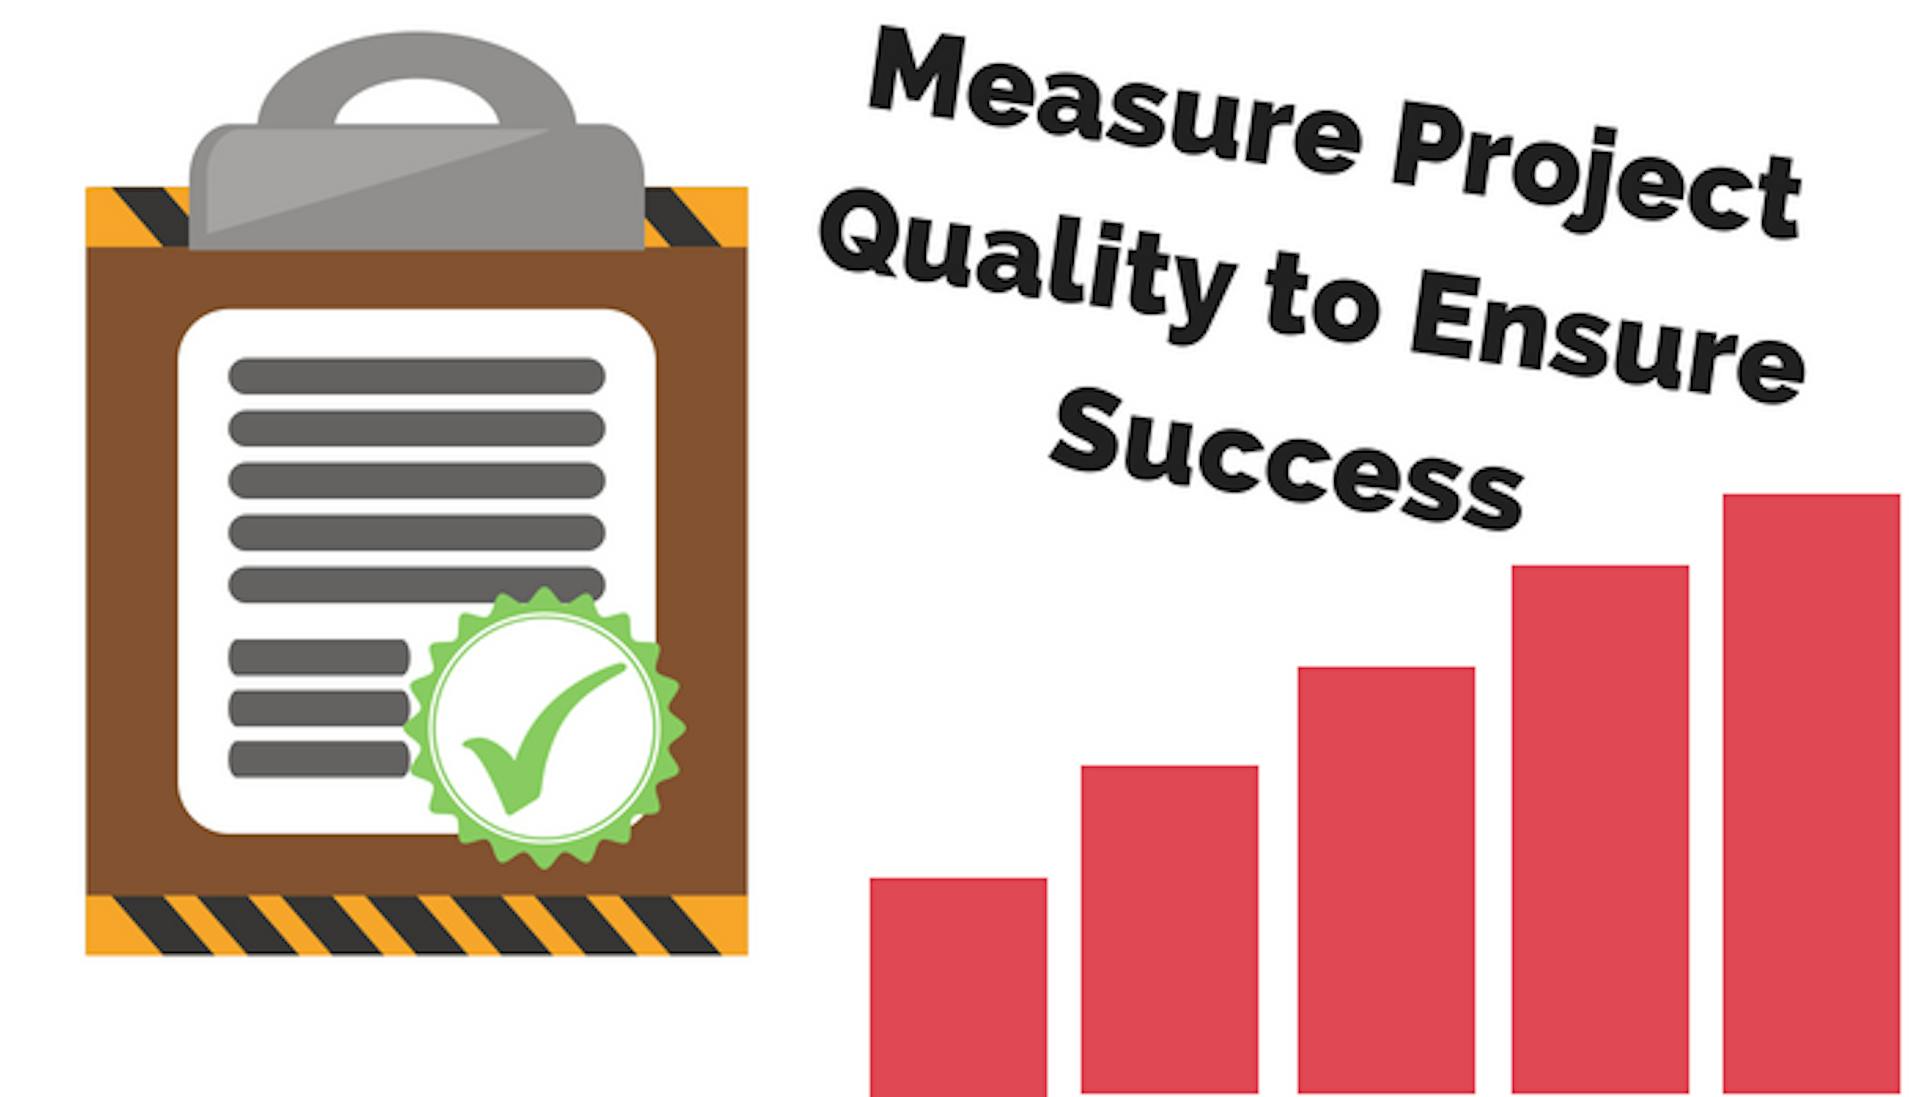 featured image - Measure Project Quality to Ensure Success